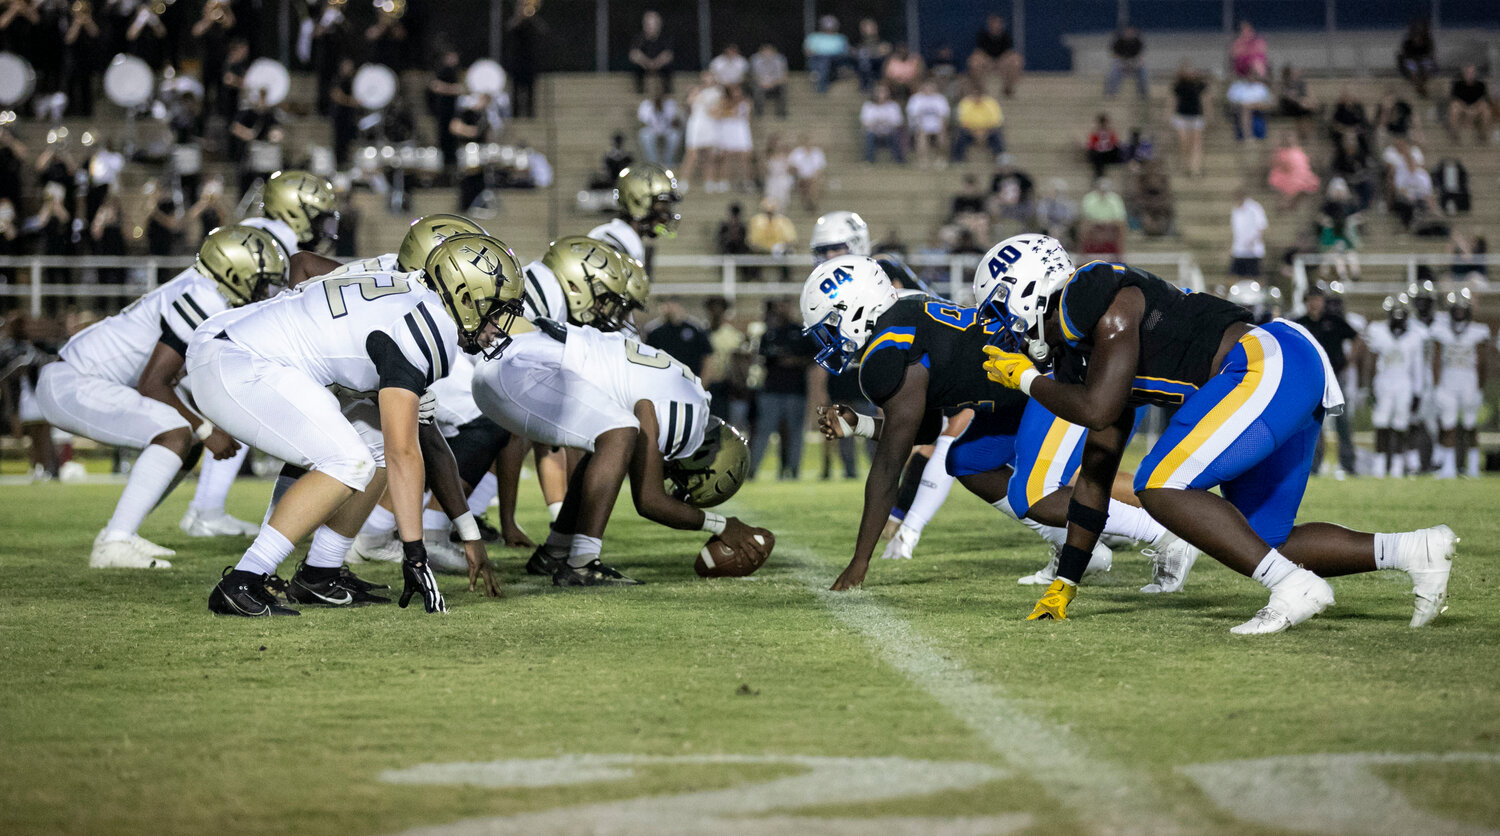 The Davidson Warriors and Fairhope Pirates squared off in a Class 7A Region 1 contest on W.C. Majors Field at Fairhope Municipal Stadium on Friday, Sept. 22. Davidson won 42-10 behind six rushing touchdowns.